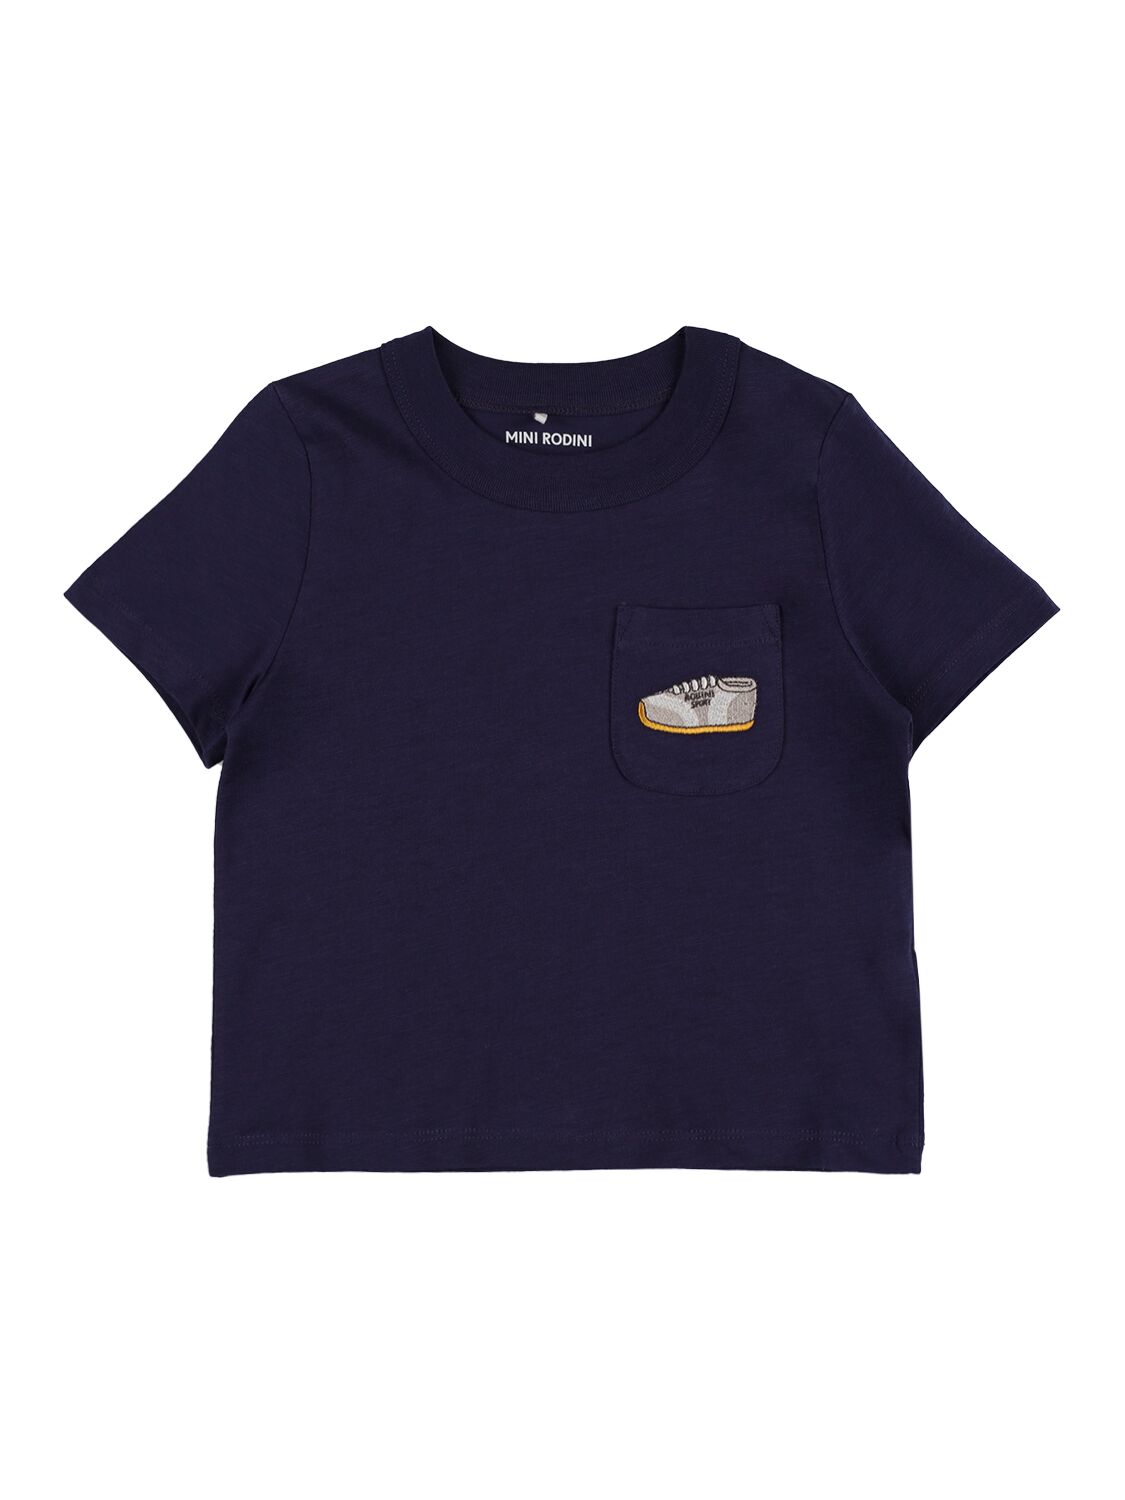 Mini Rodini Babies' Embroidered Cotton T-shirt In Navy